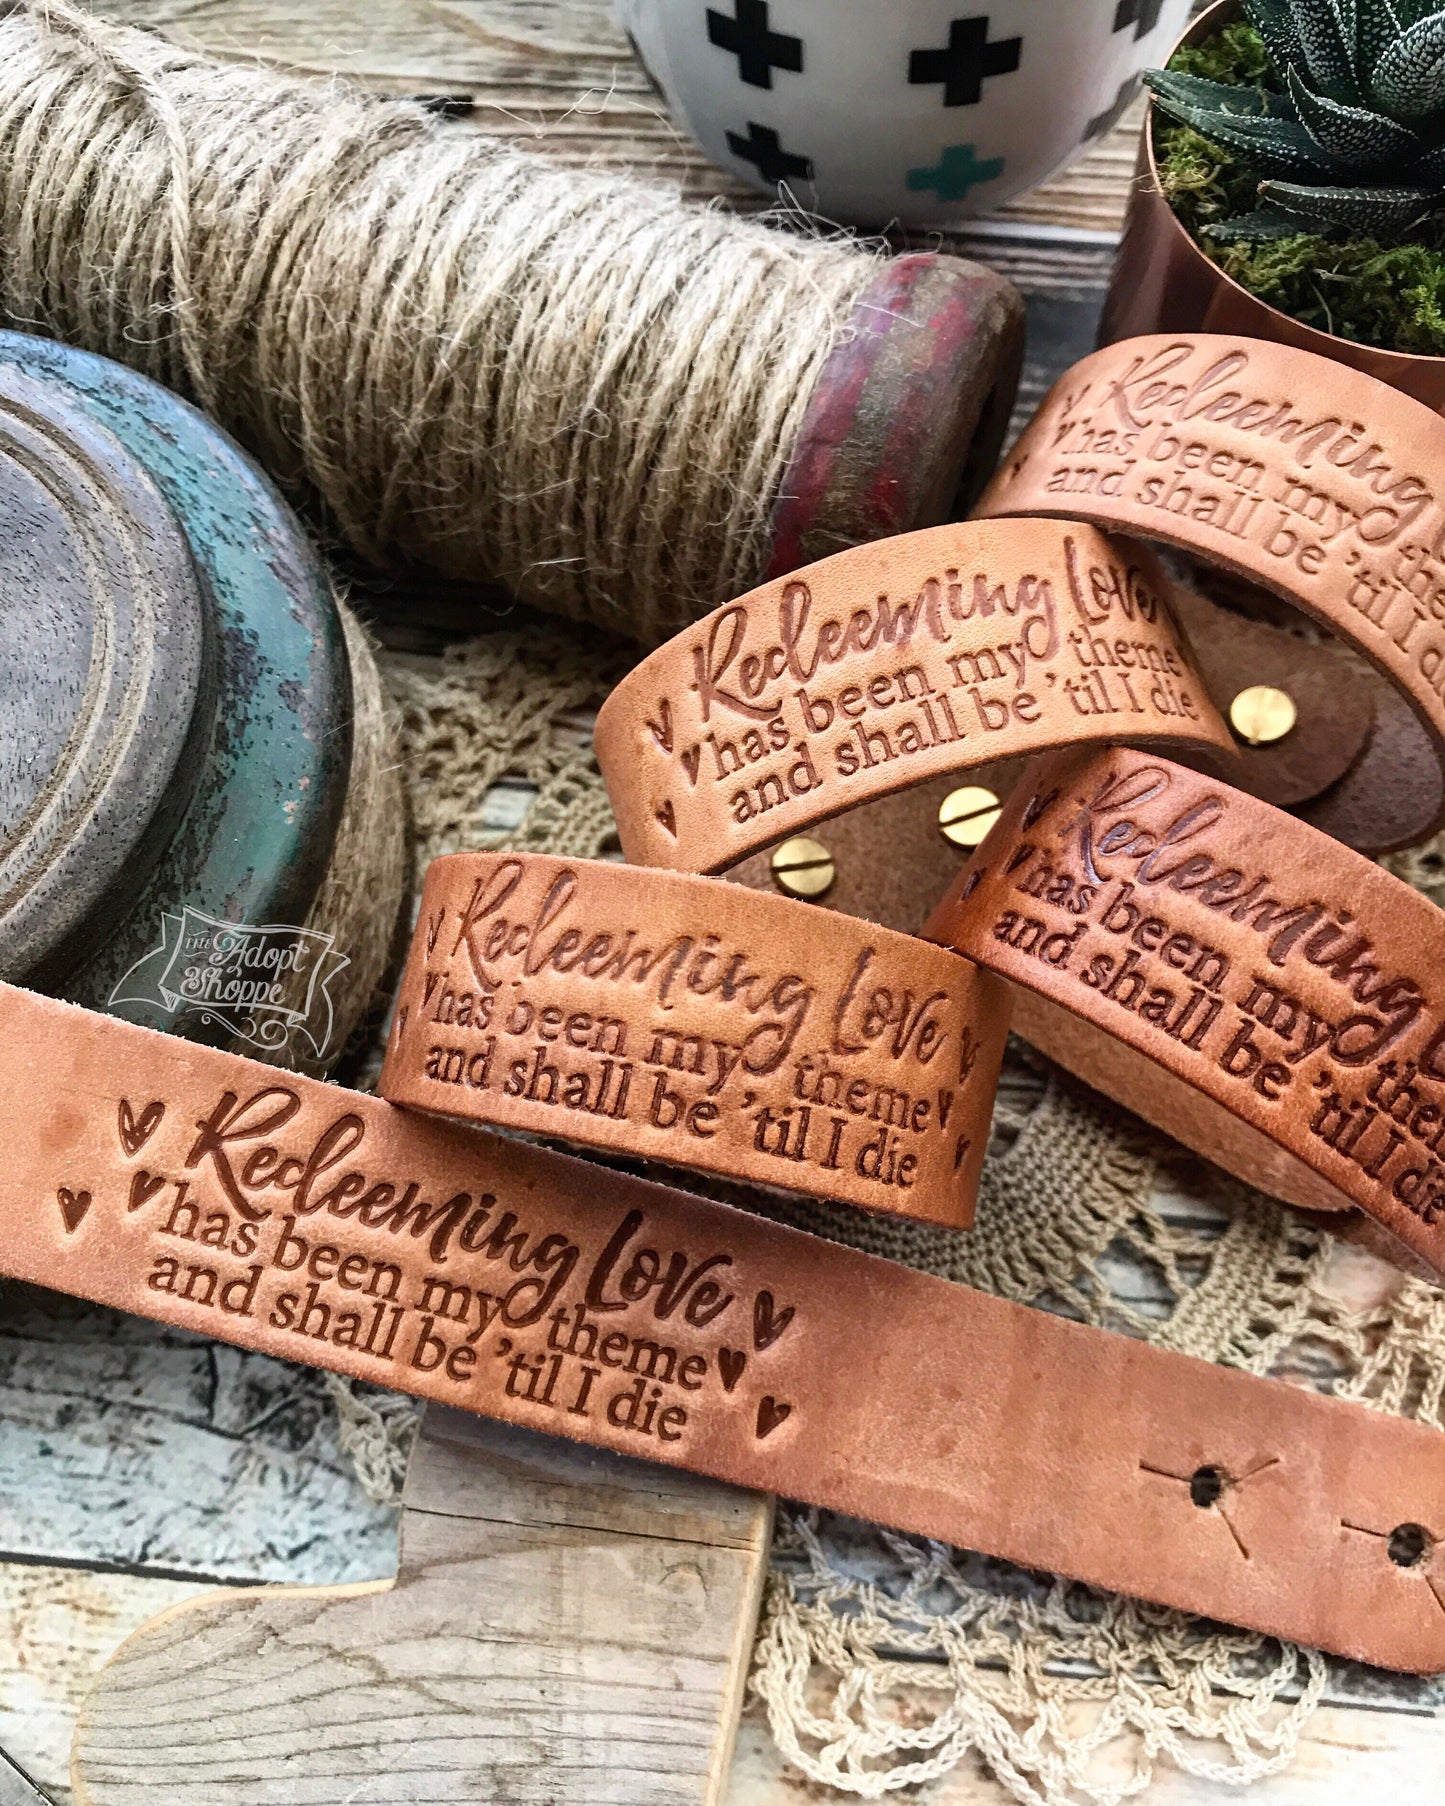 redeeming love has been my theme and shall be 'til i die hymn (natural camel) leather cuff